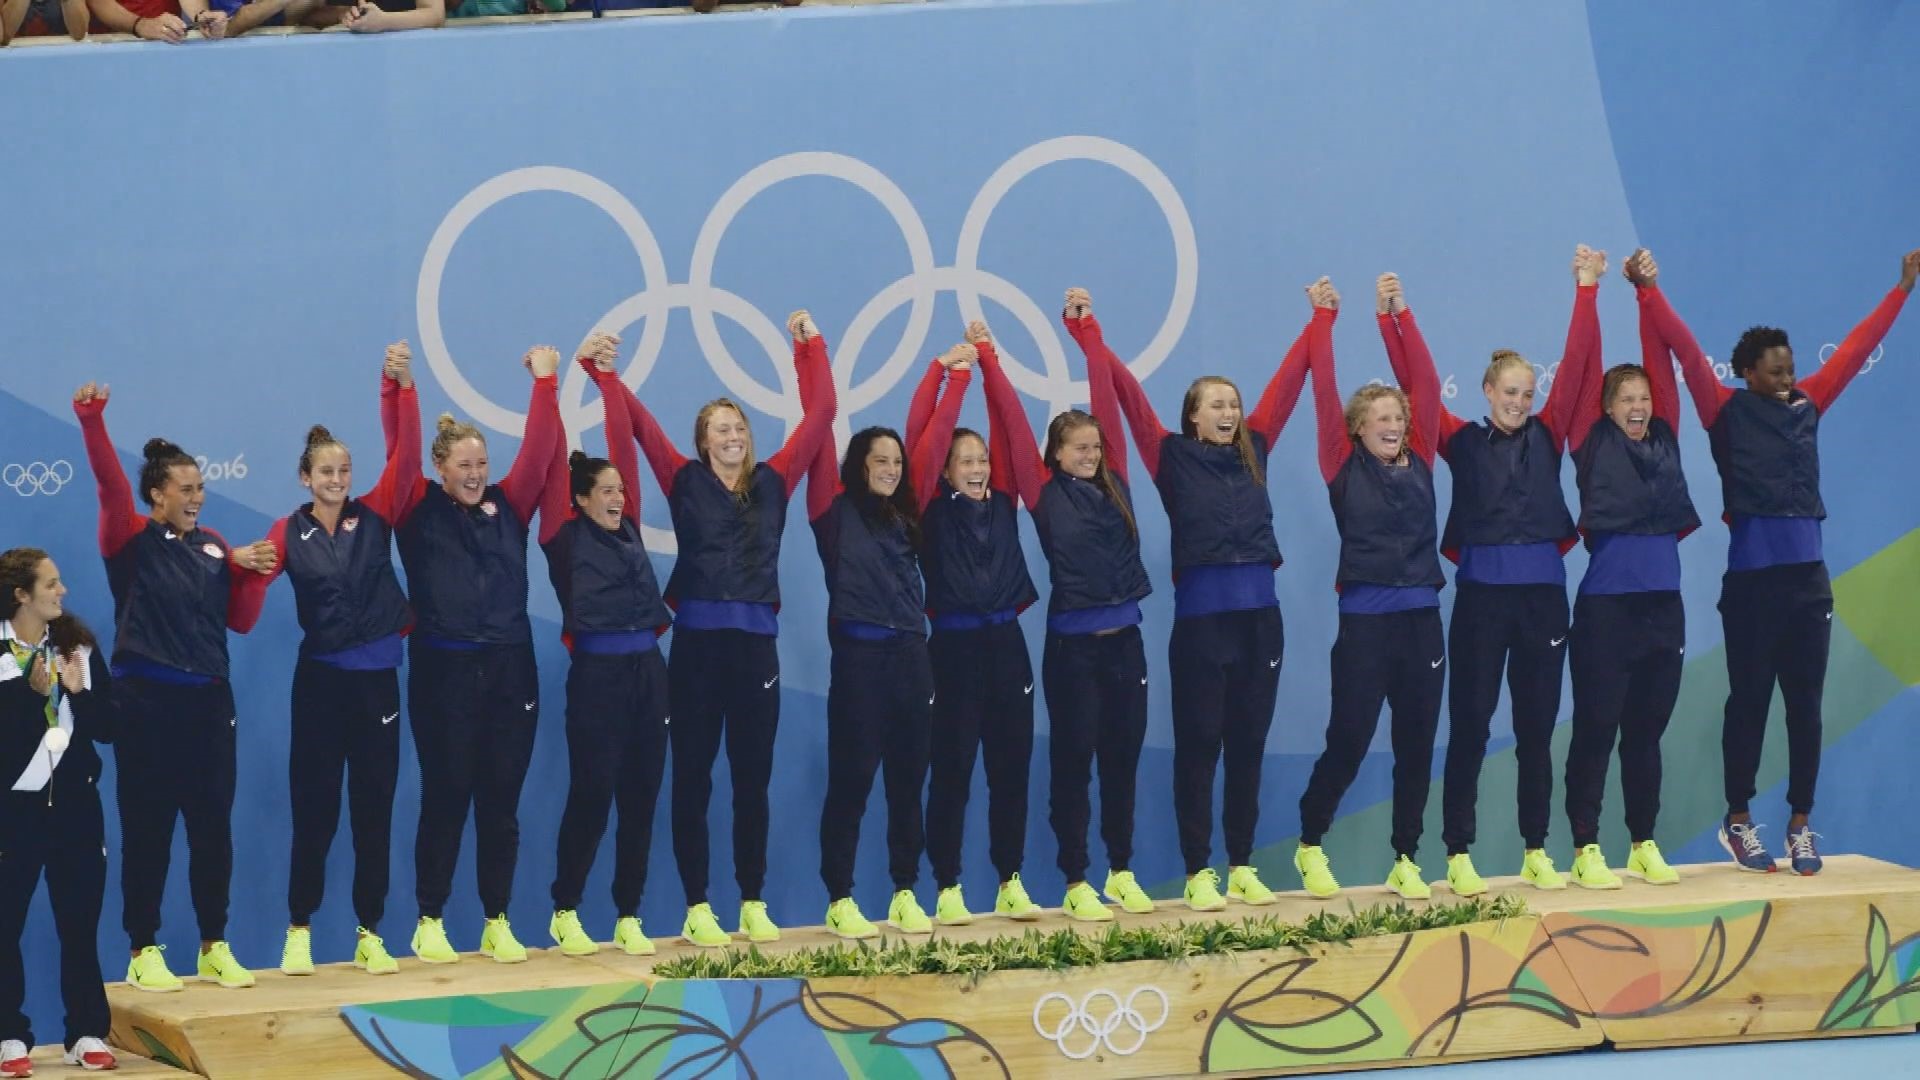 The women of Team USA were absolutely dominant at the last Olympics in Rio, and there is no reason to think they won't be ready to repeat that performance in Tokyo.